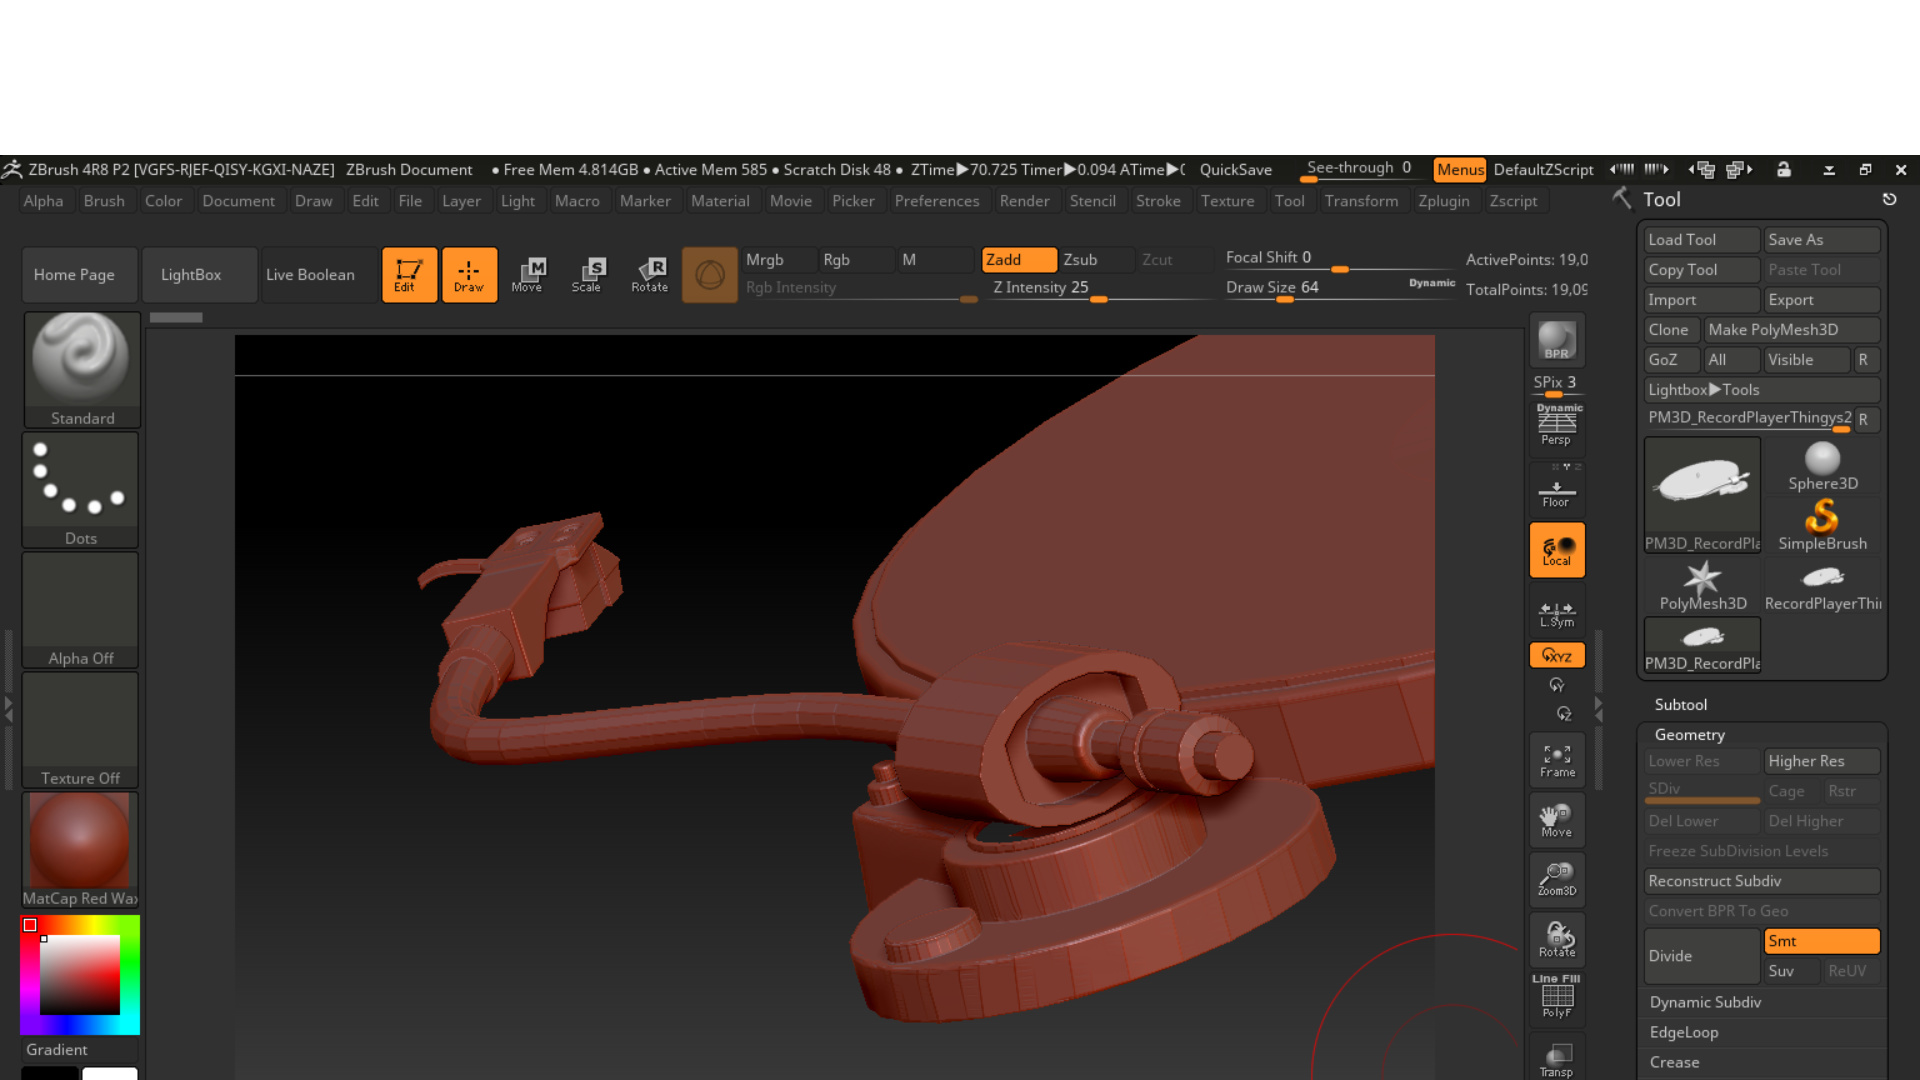 why does zbrush export objs unconnected